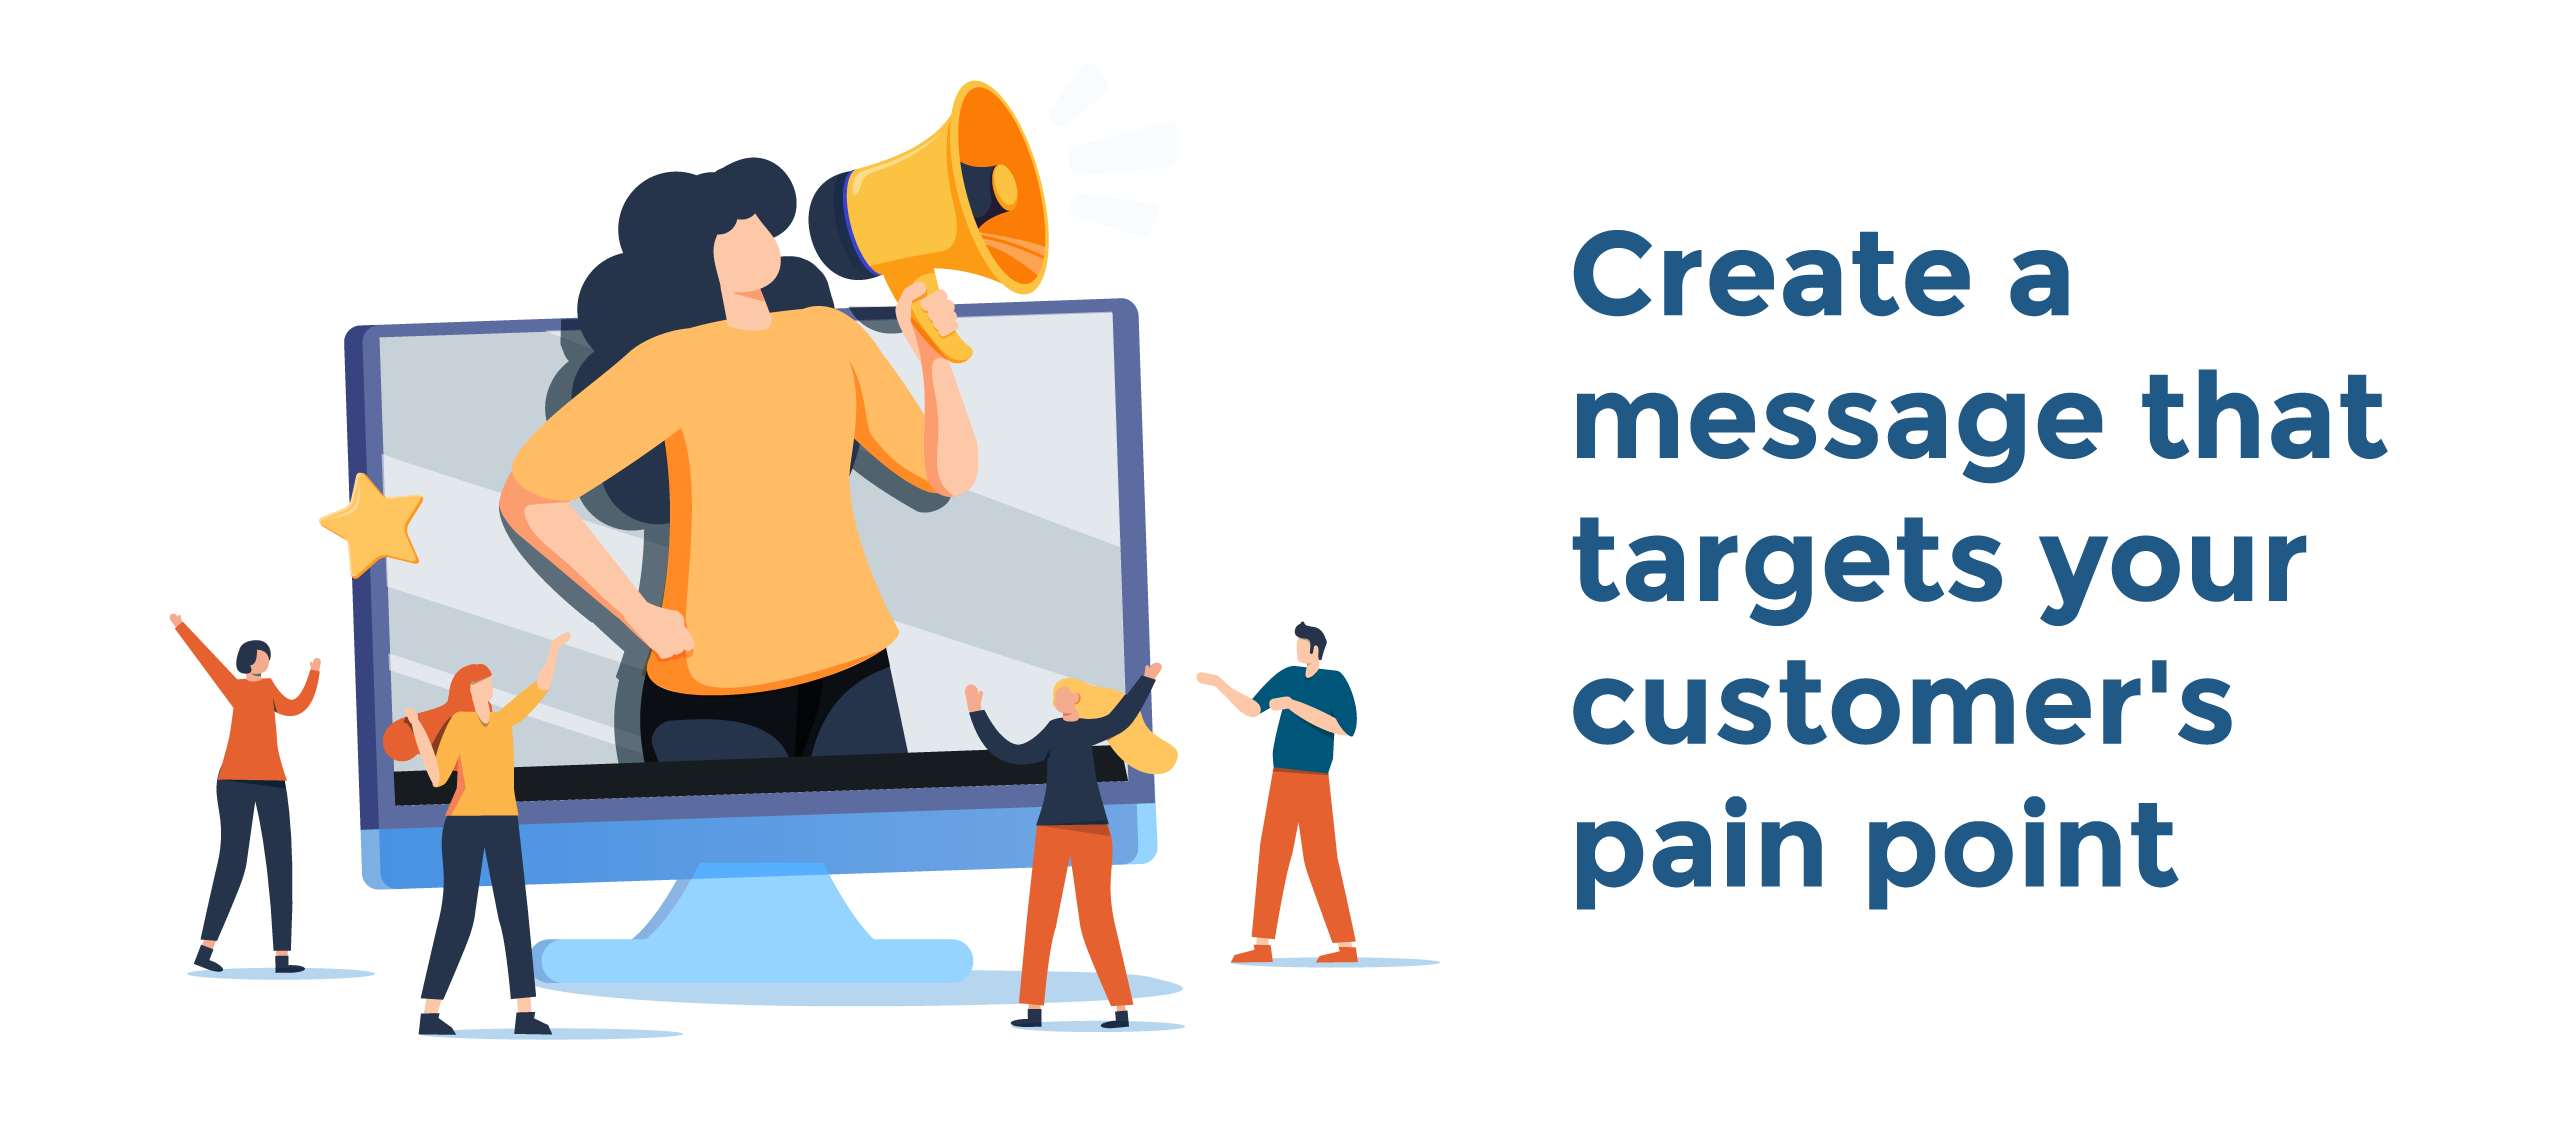 create a message that targets your customer's pain point